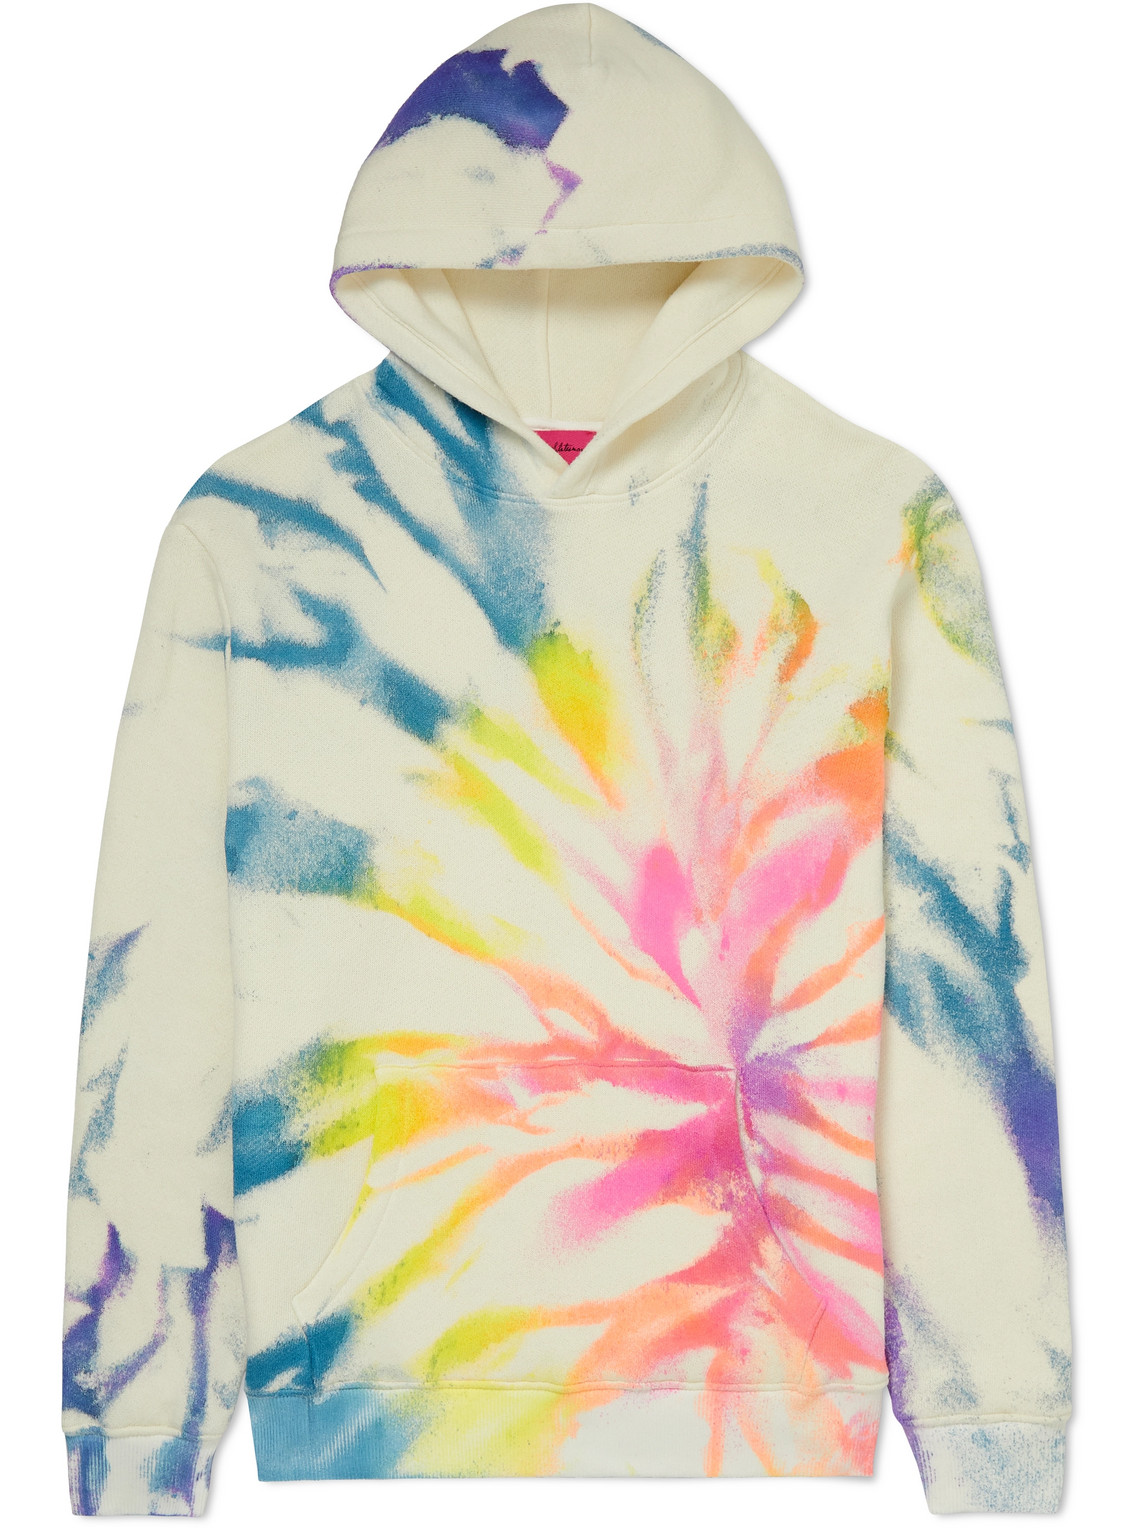 the elder statesman - spinner tie-dyed cotton and cashmere-blend jersey hoodie - men - multi - s